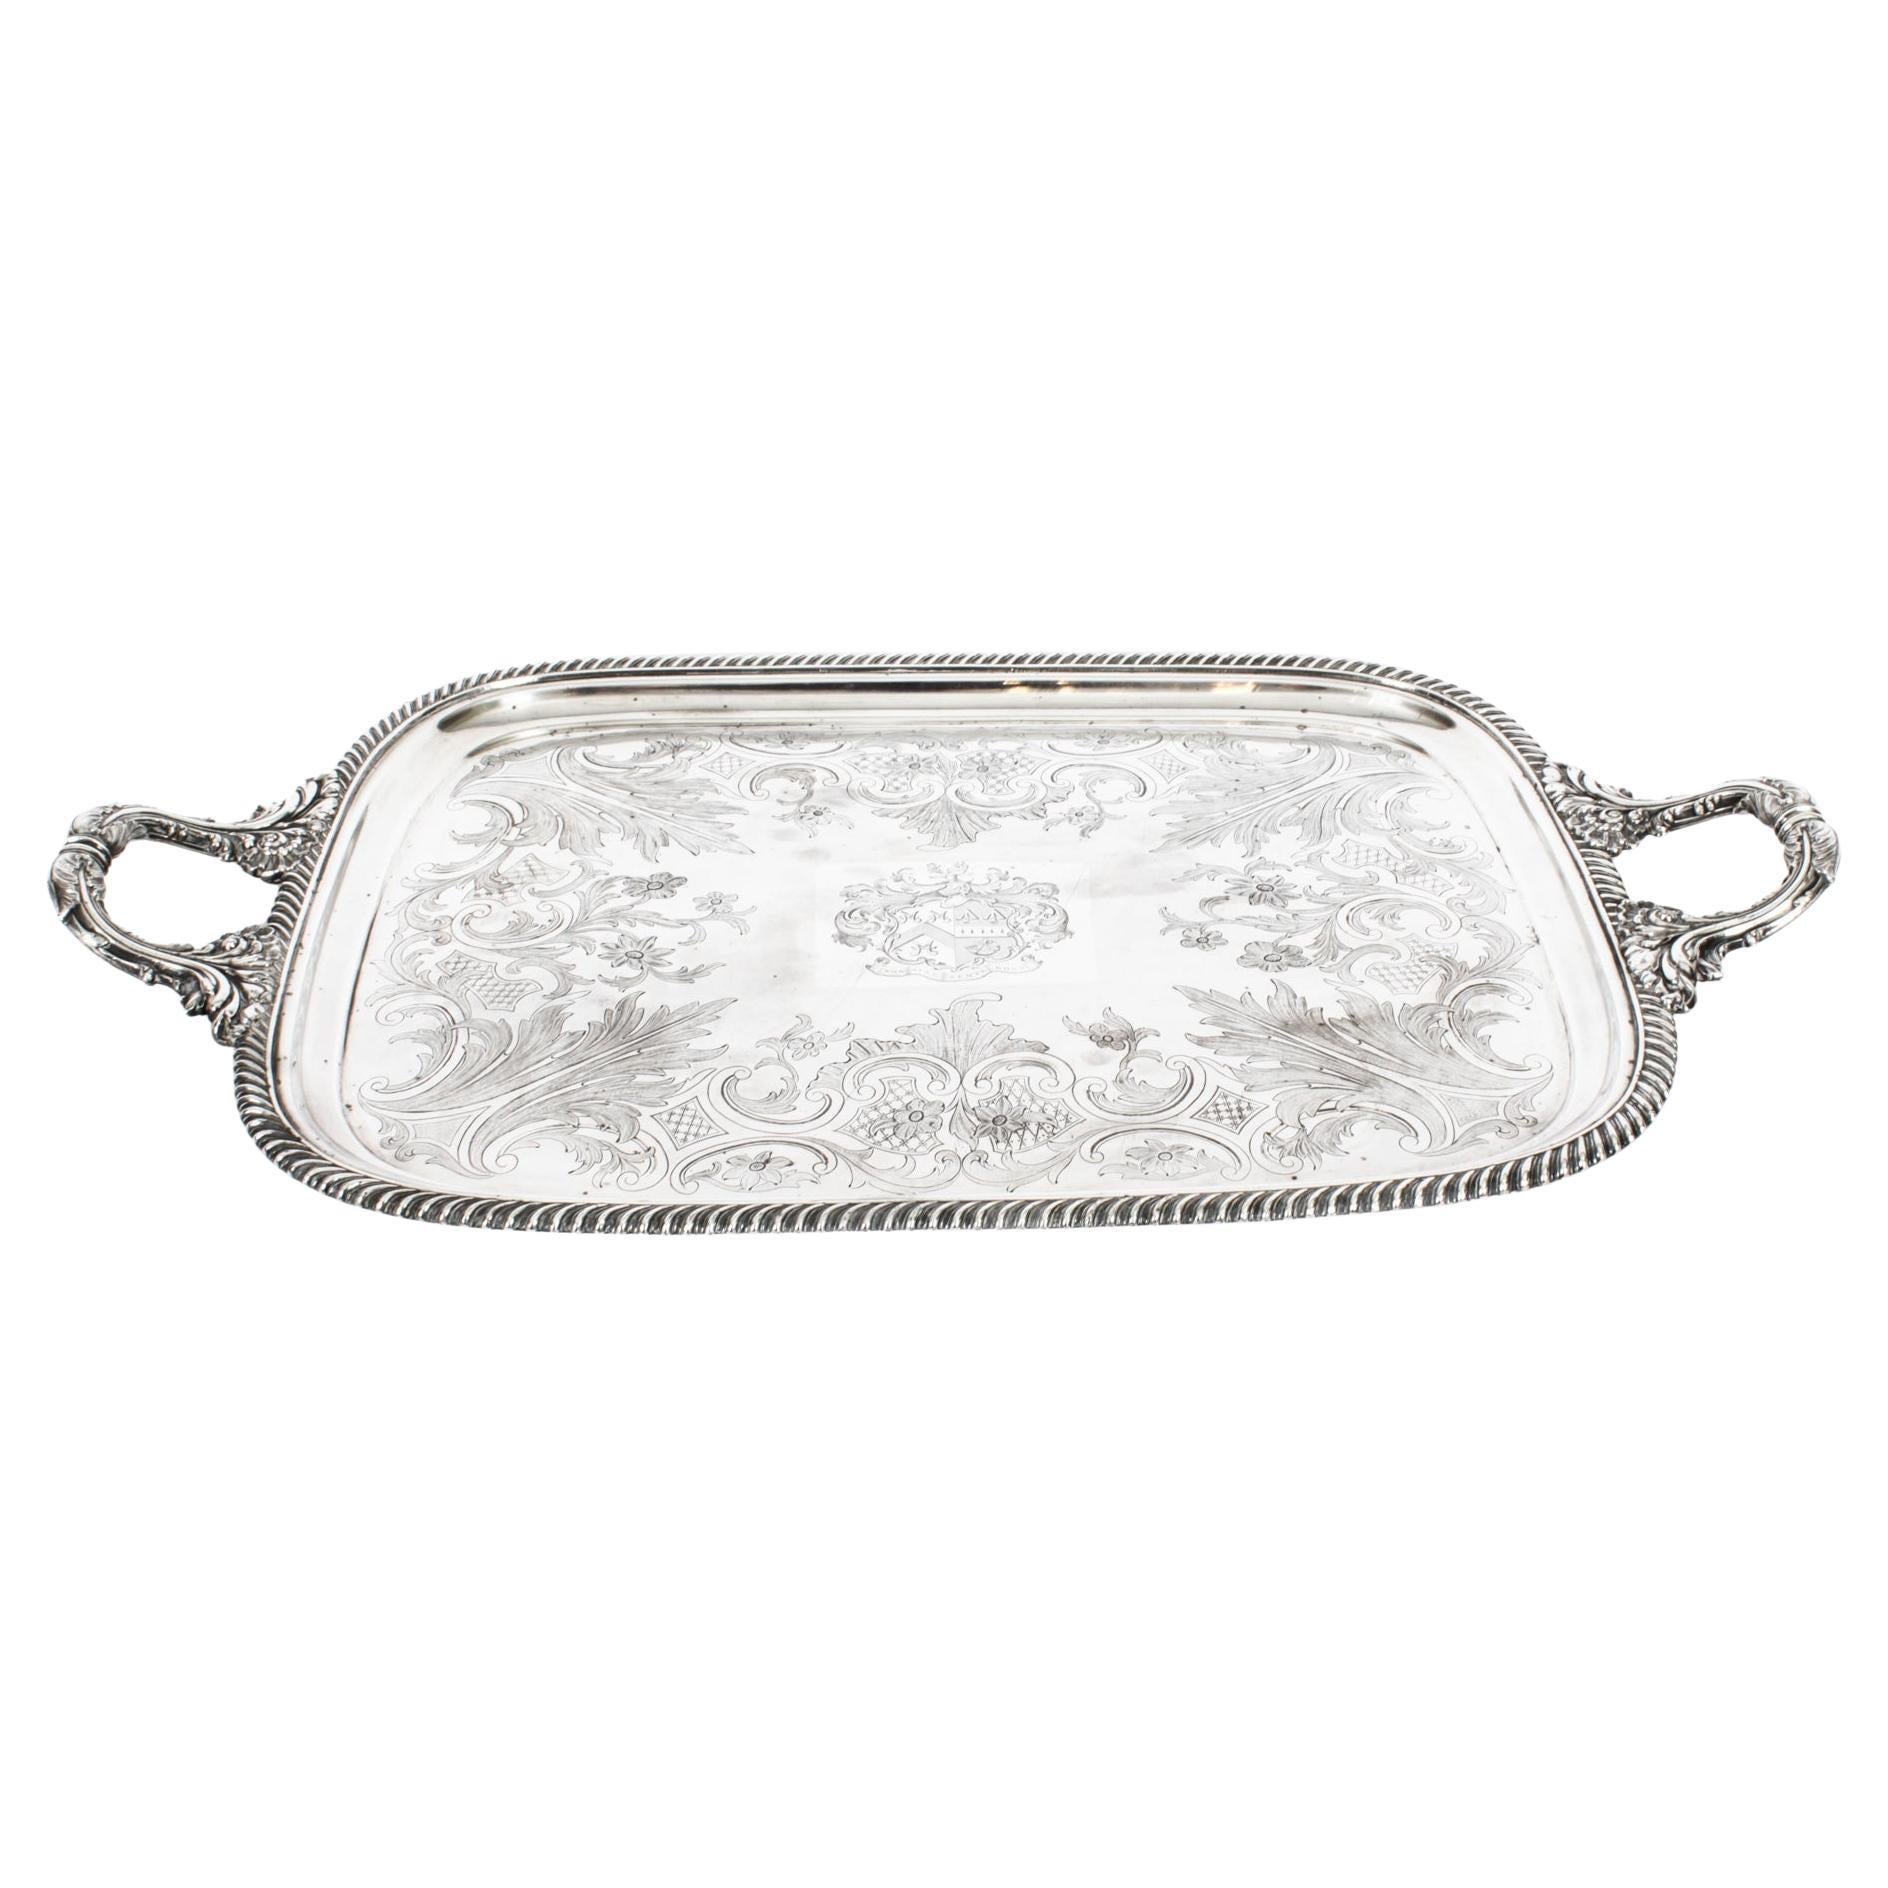 Antique George III Old Sheffield Silver Plated Tray 18th Century